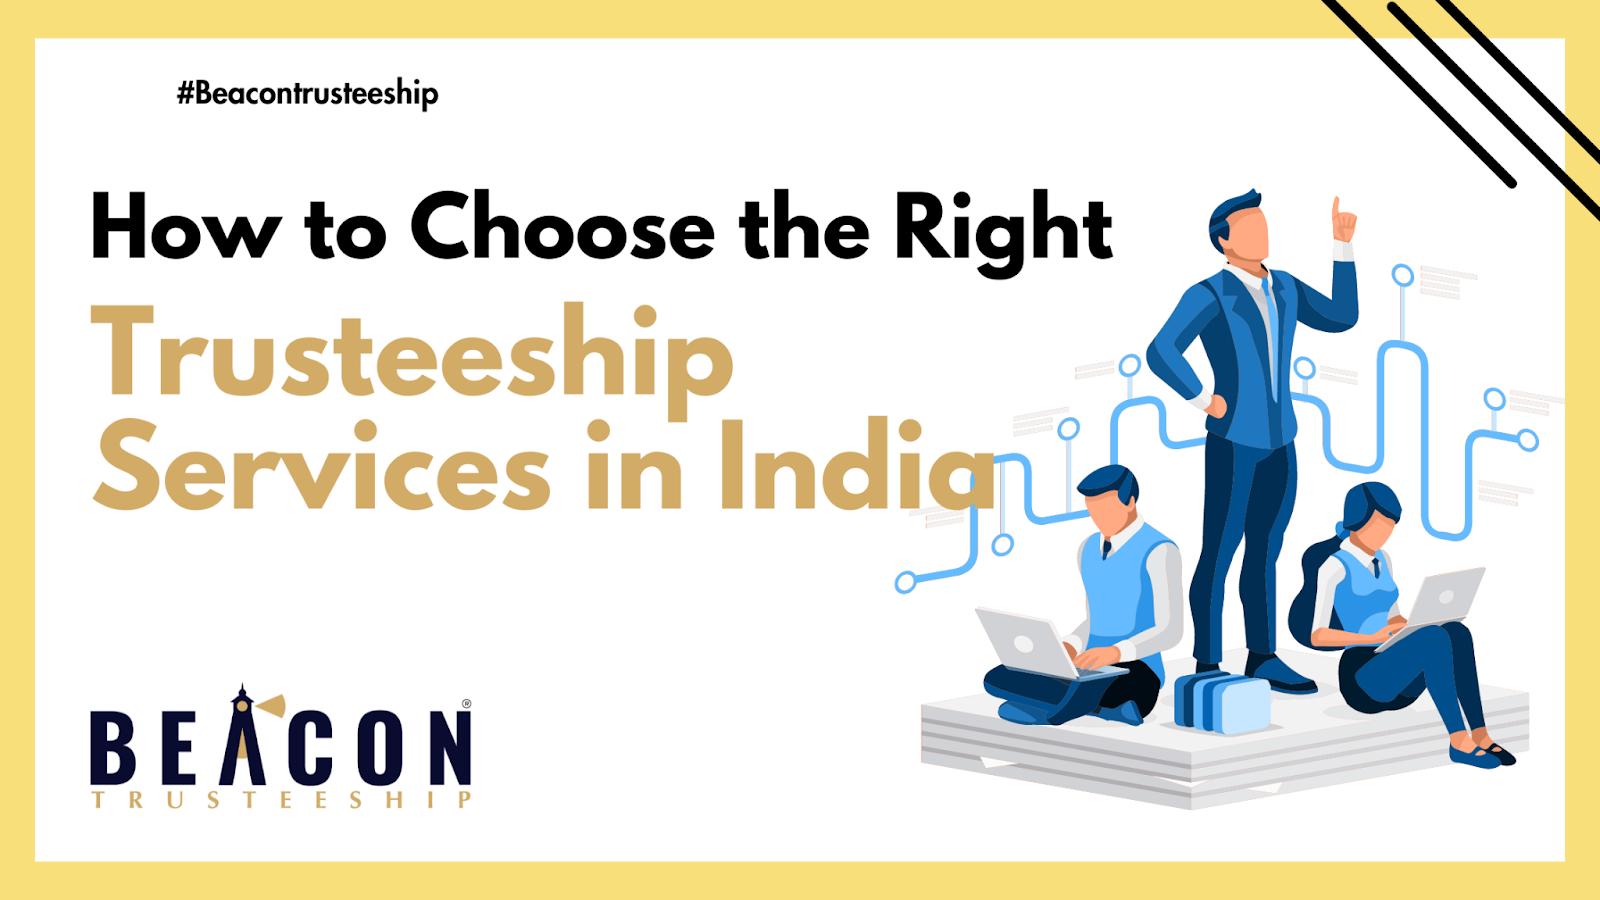 How to Choose the Right Trusteeship Services in India